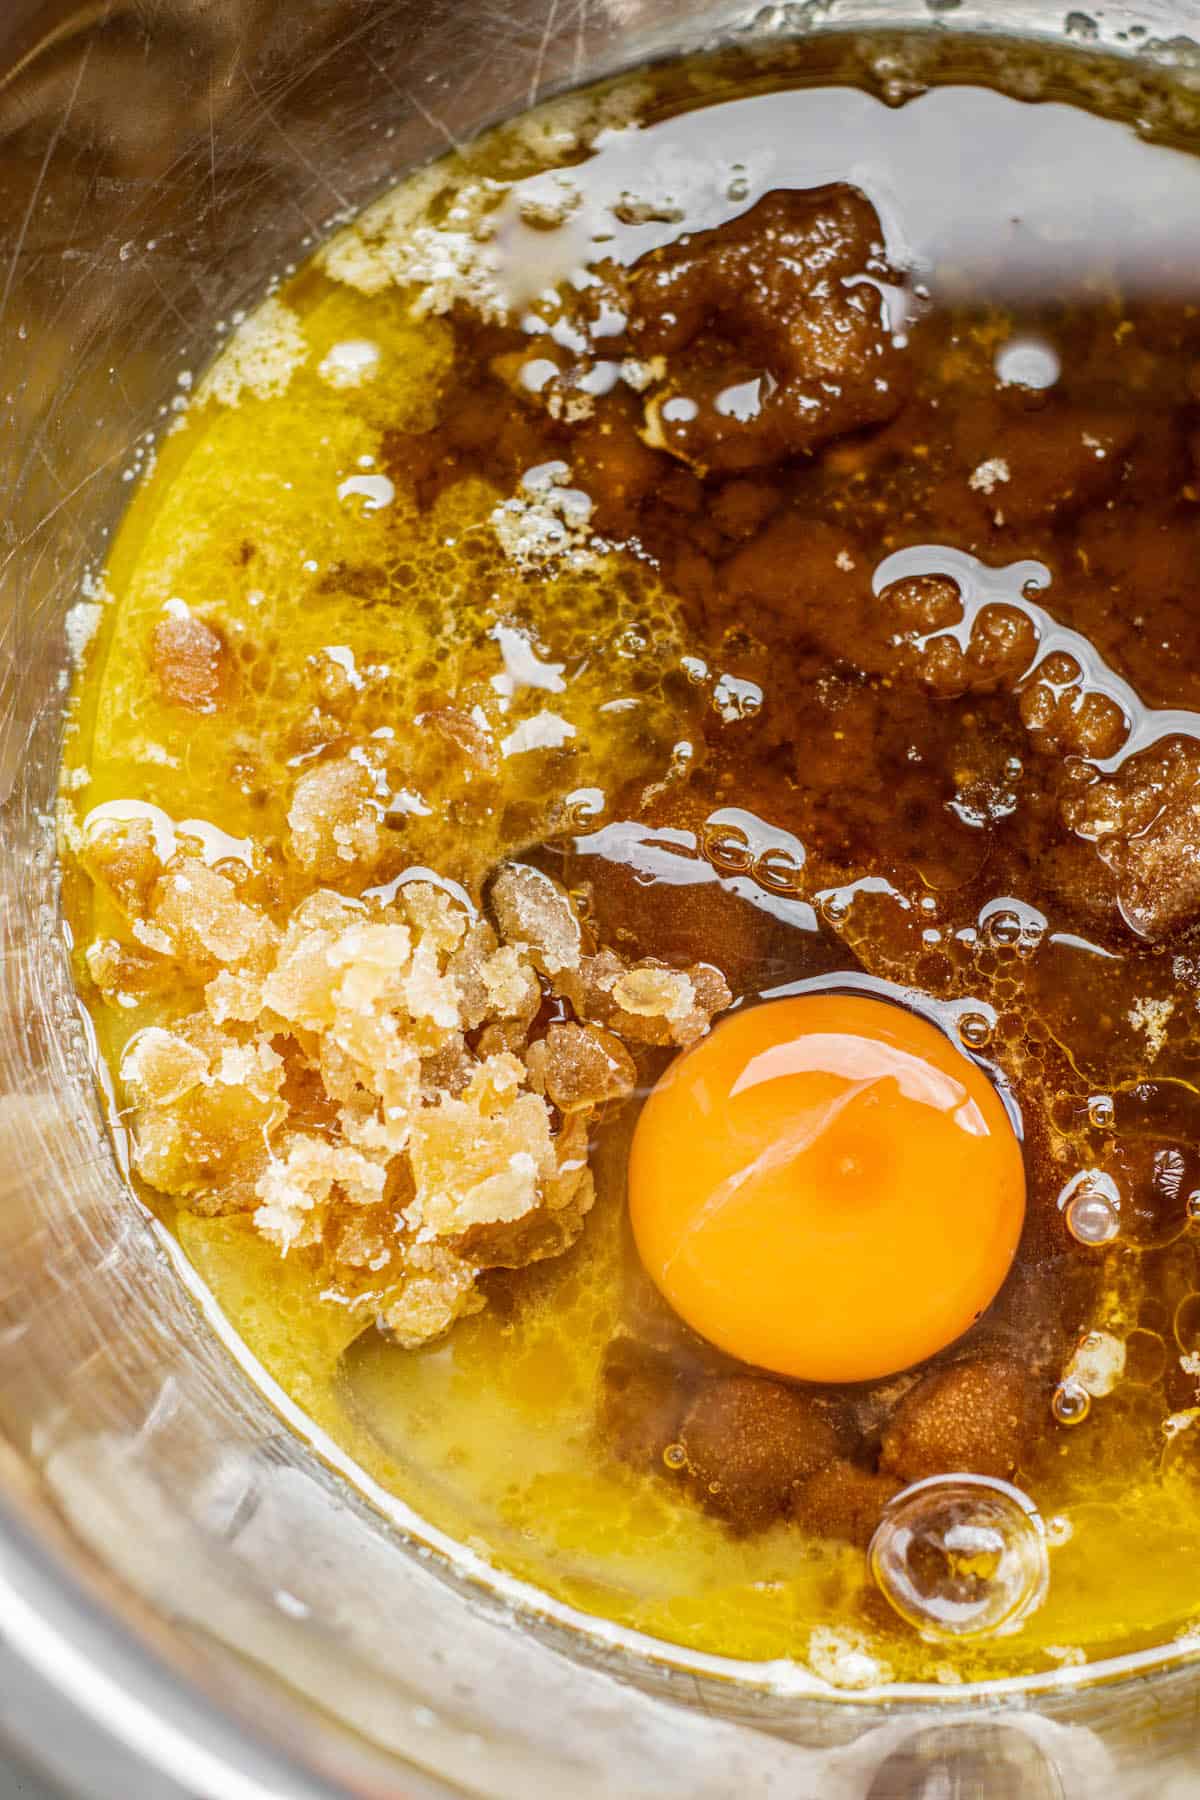 egg, chopped ginger, sugar, butter in a bowl.